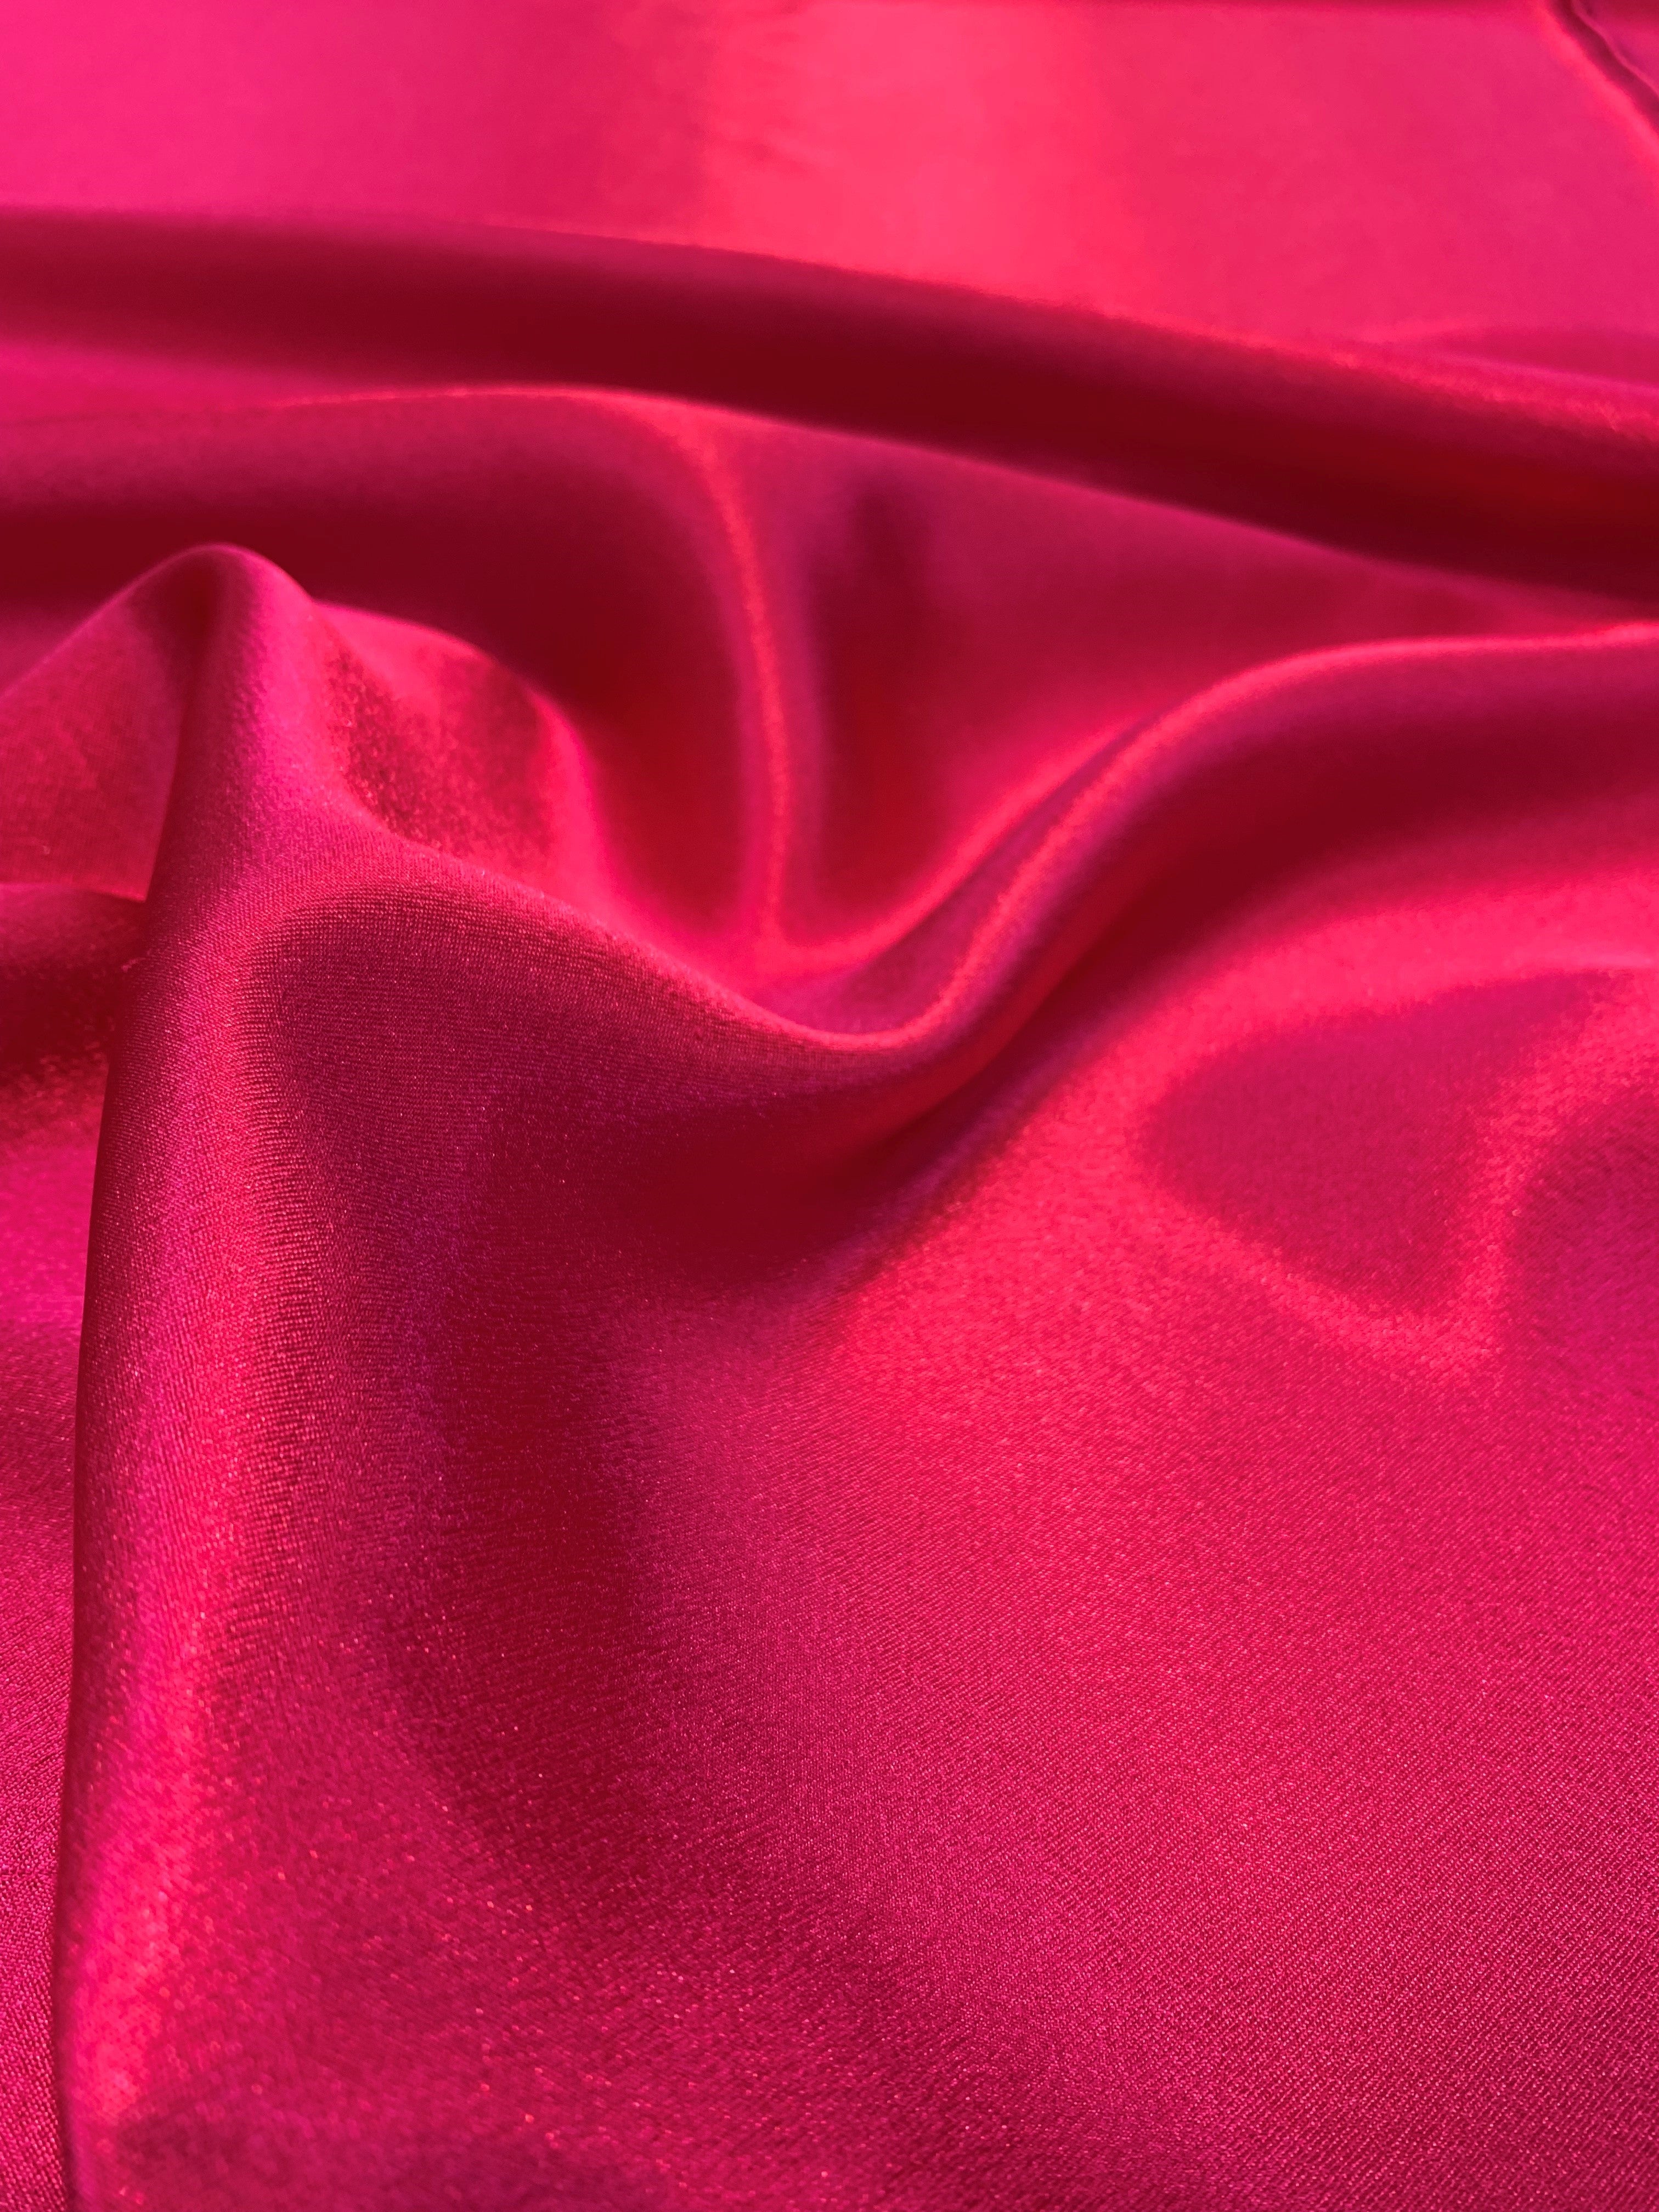 Crepe Back Satin Bridal Fabric Drapery Soft 60 inch Inches by The Yard (Fuchsia), Pink